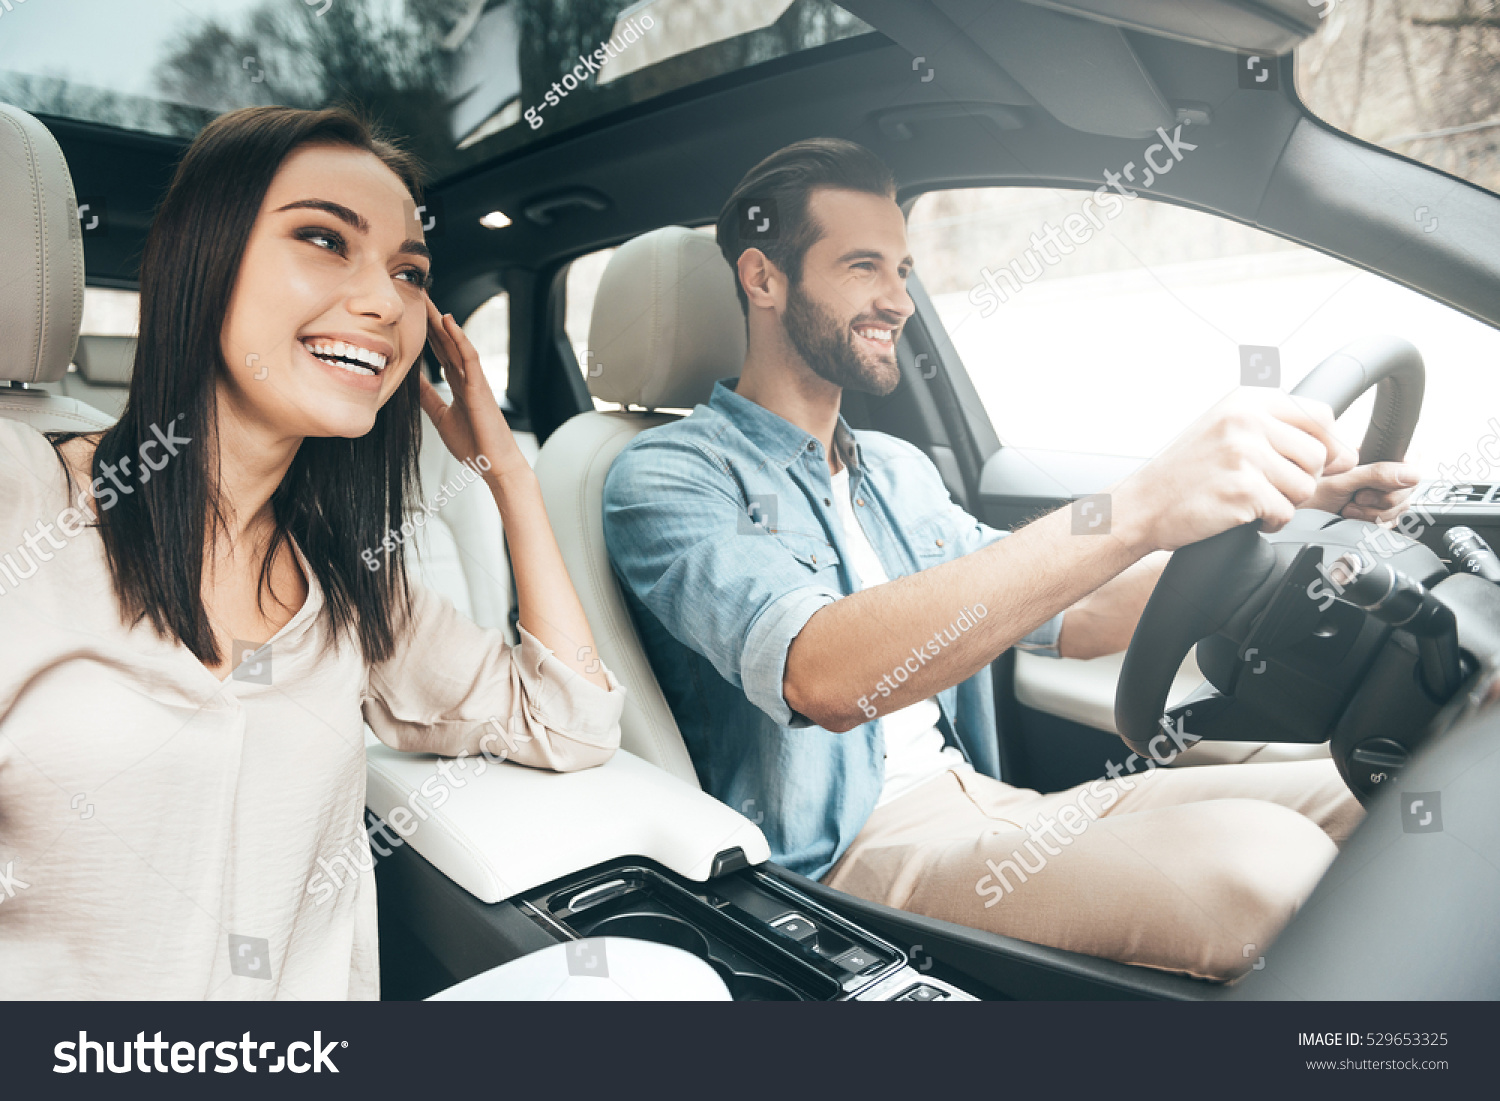 Enjoying travel. Beautiful young couple sitting on the front passenger seats and smiling while handsome man driving a car #529653325